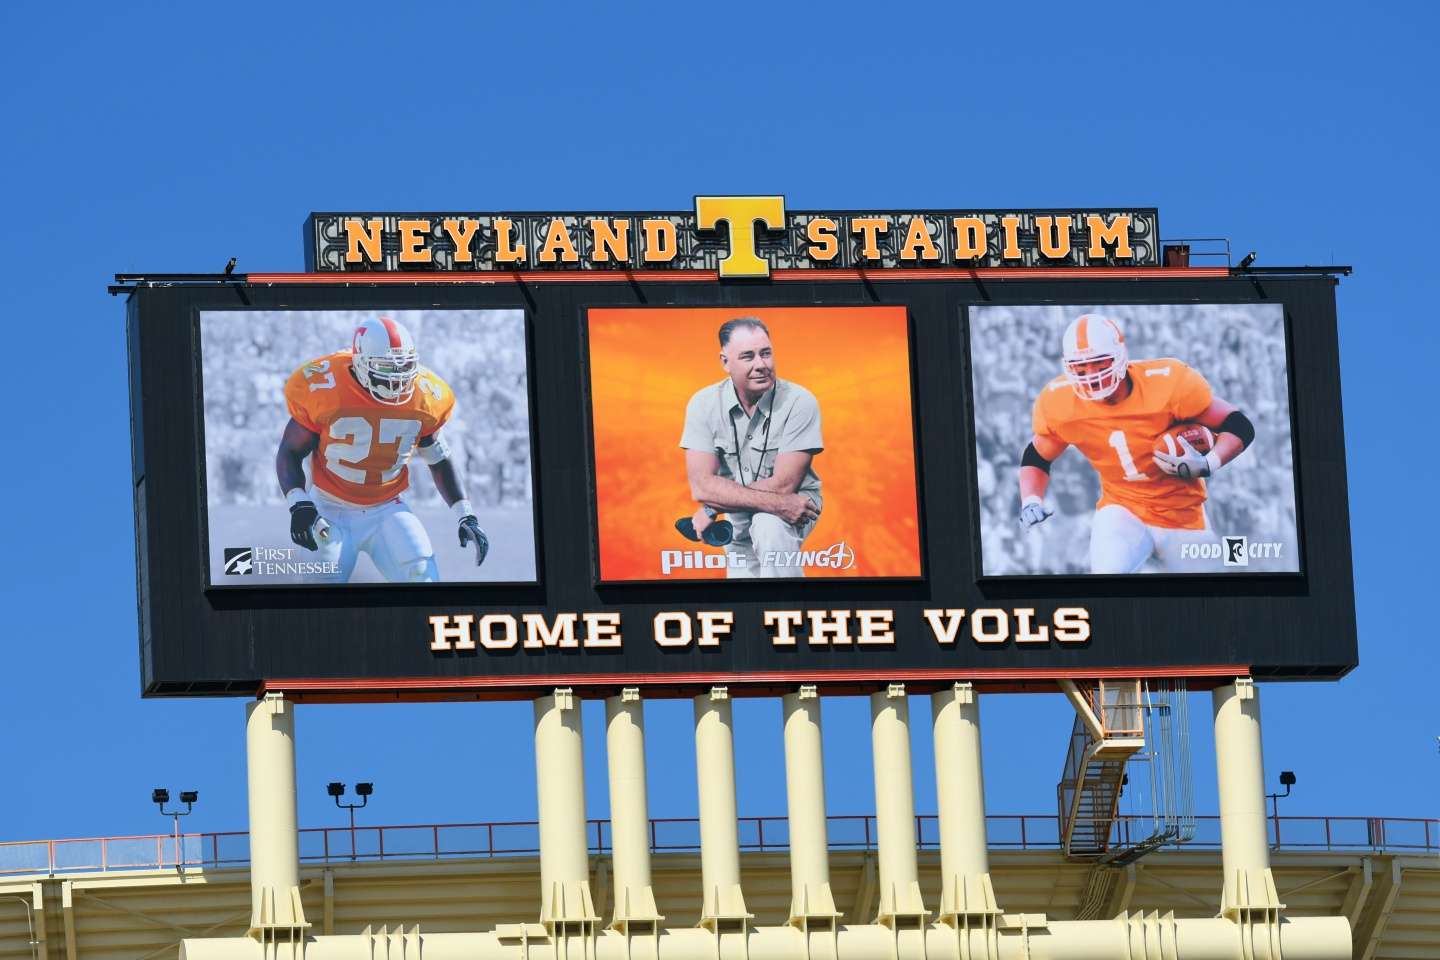 On the backside of the screen are three UT greats: Former coach Gen. Robert Neyland, flanked on the left by Vols Al Wilson and Jason Witten at right. He went on to play for the Dallas Cowboys and ranks second in all-time receptions and receiving yards by an NFL tight end. Wilson played on the Vols 1998 NCAA National Championship team, then eight seasons for the Denver Broncos. 